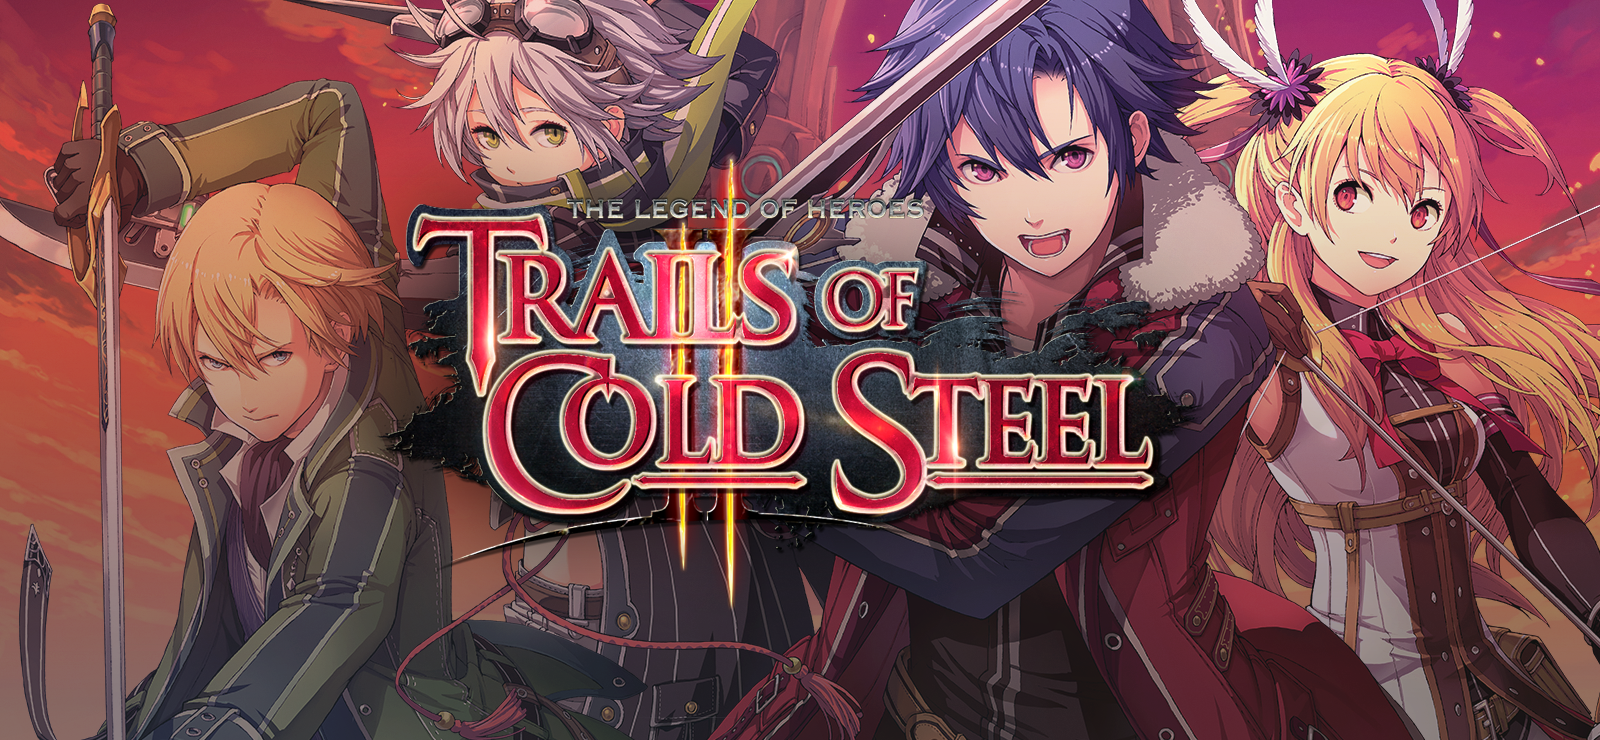 The Legend Of Heroes: Trails Of Cold Steel II - Shining Pom Bait Set 2